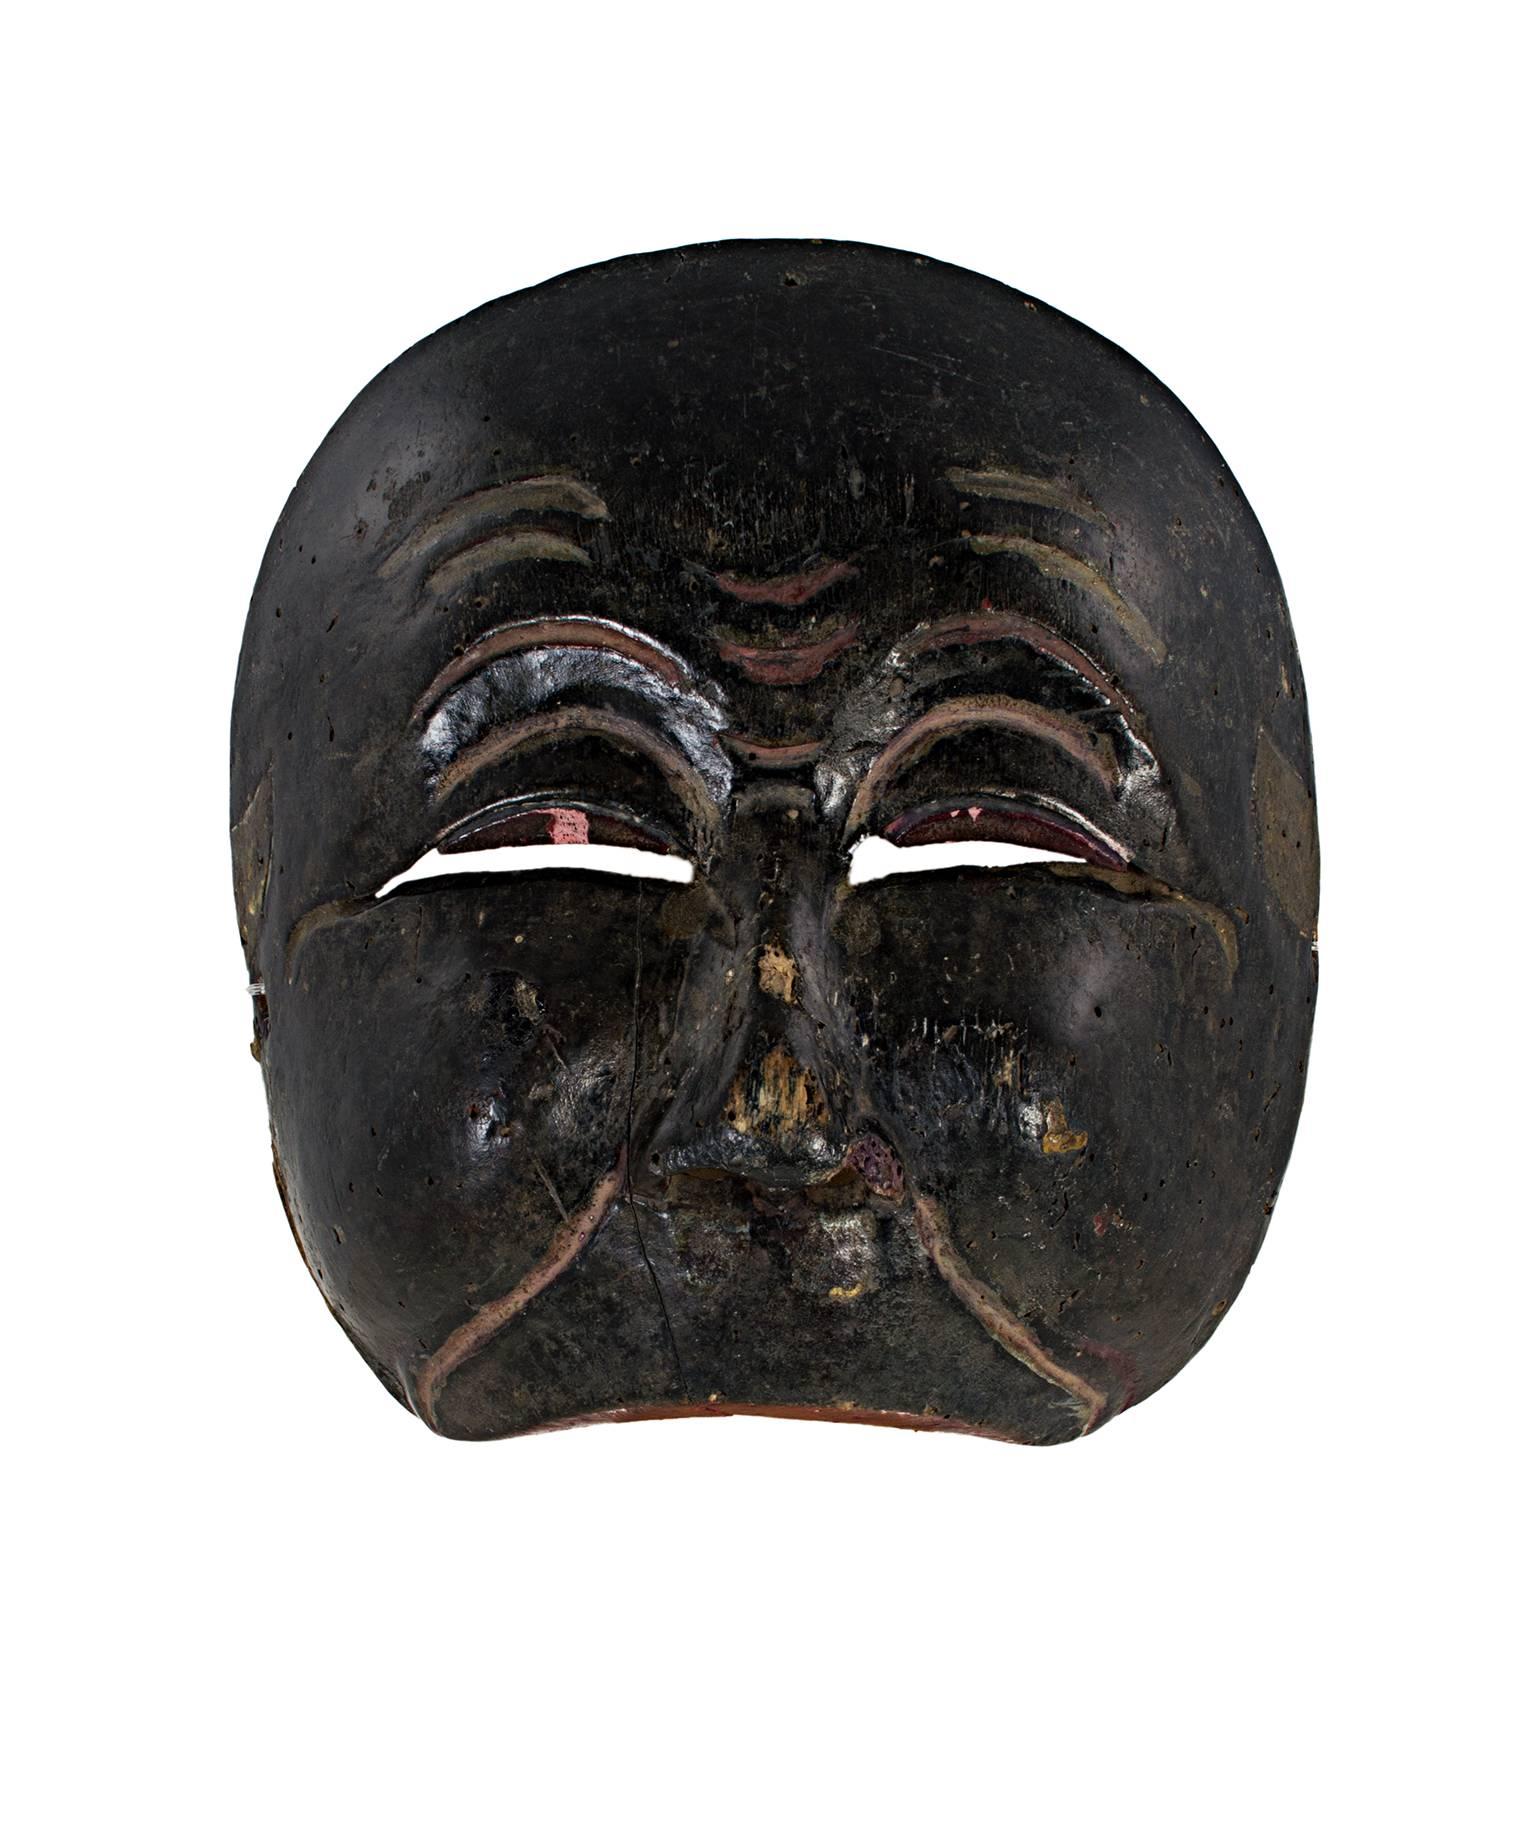 "Indonesian, Half Mask with Slanted Eyes, " Carved from Wood & Painted 19th Cen. - Sculpture by Unknown